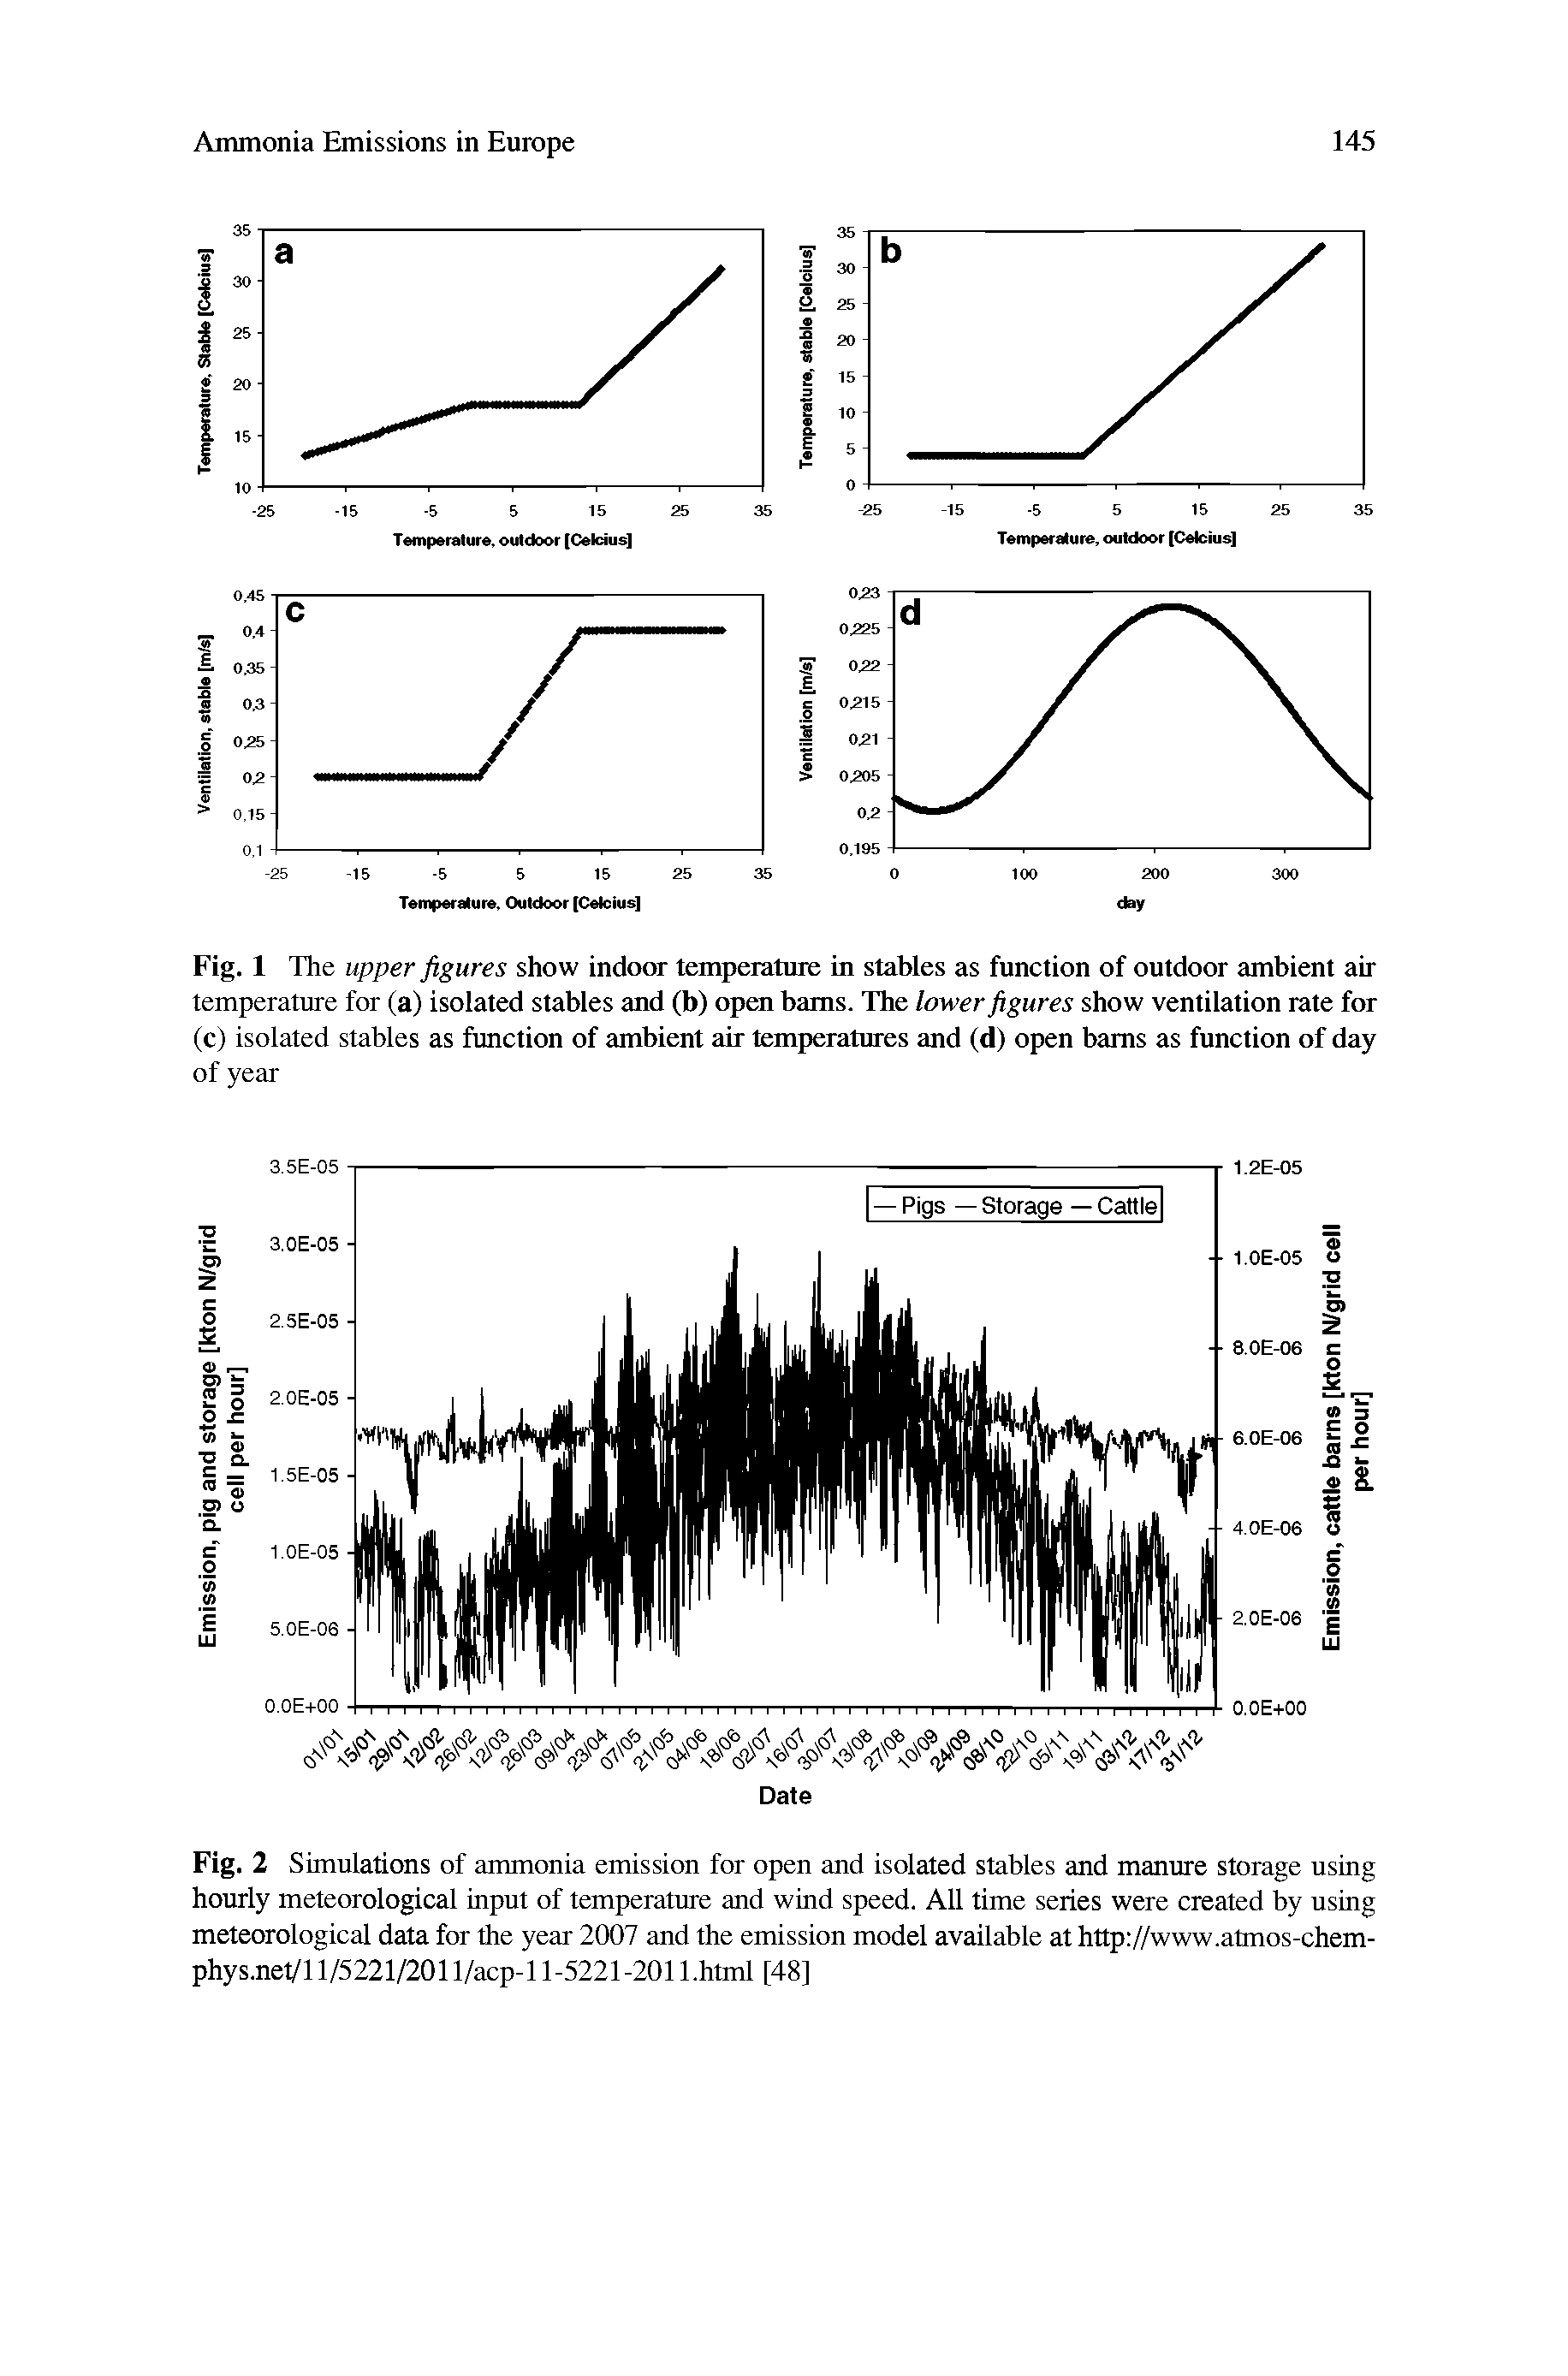 Fig. 2 Simulations of ammonia emission for open and isolated stables and manure storage using hourly meteorological input of temperature and wind speed. All time series were created by using meteorological data for the year 2007 and the emission model available at http //www.atmos-chem-phys.net/11/5221/2011/acp-l 1-5221-201 l.html [48]...